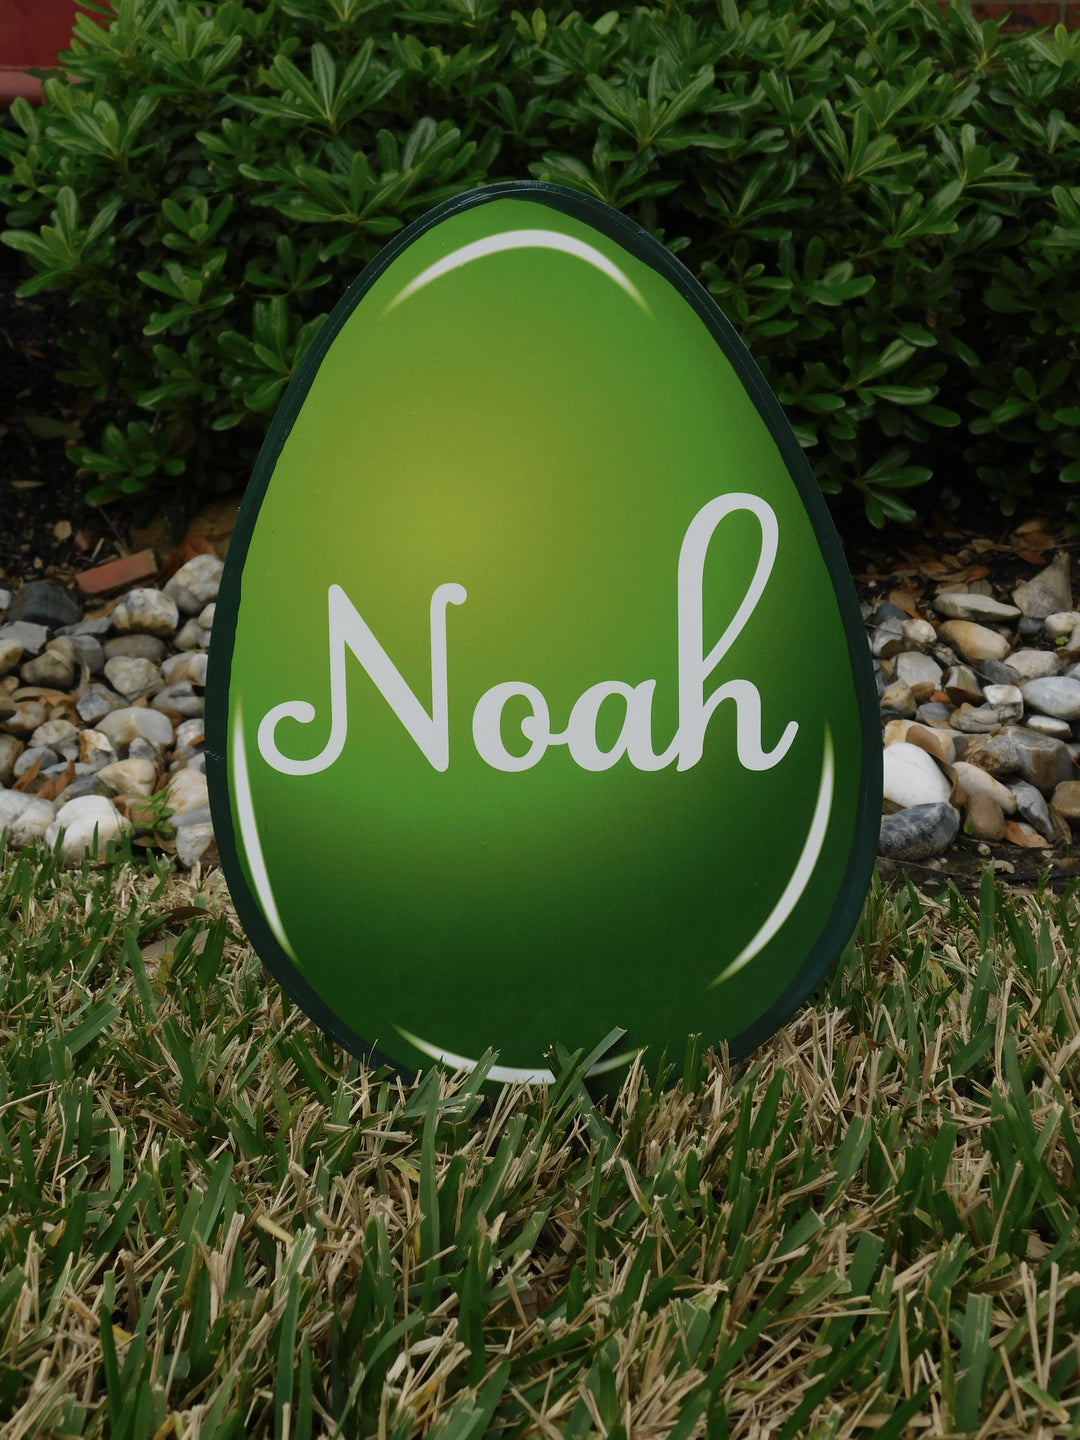 Easter Yard Art-Easter Eggs Solid Colors Personalized